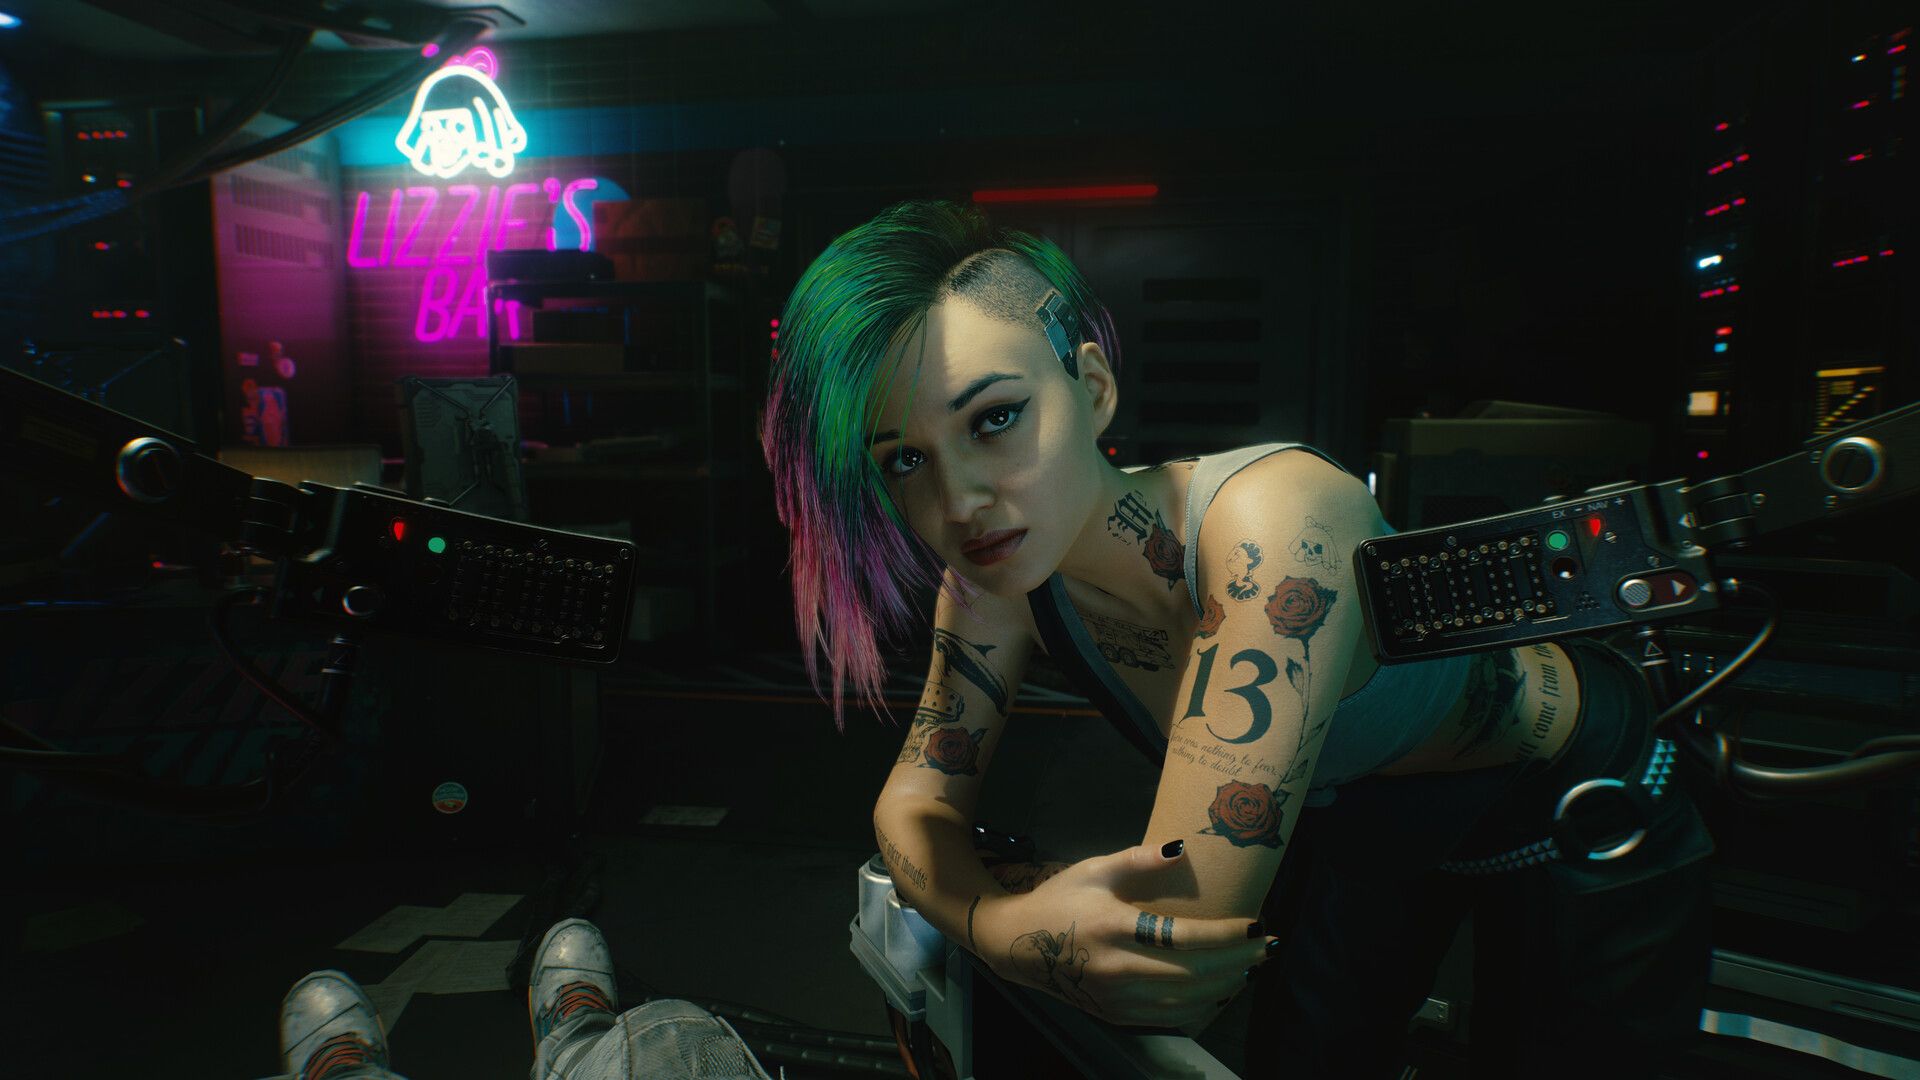 In this article, we are going to be covering how to fix Cyberpunk 2077 Sandevistan not working, so you can take advantage of this temporary status effect.